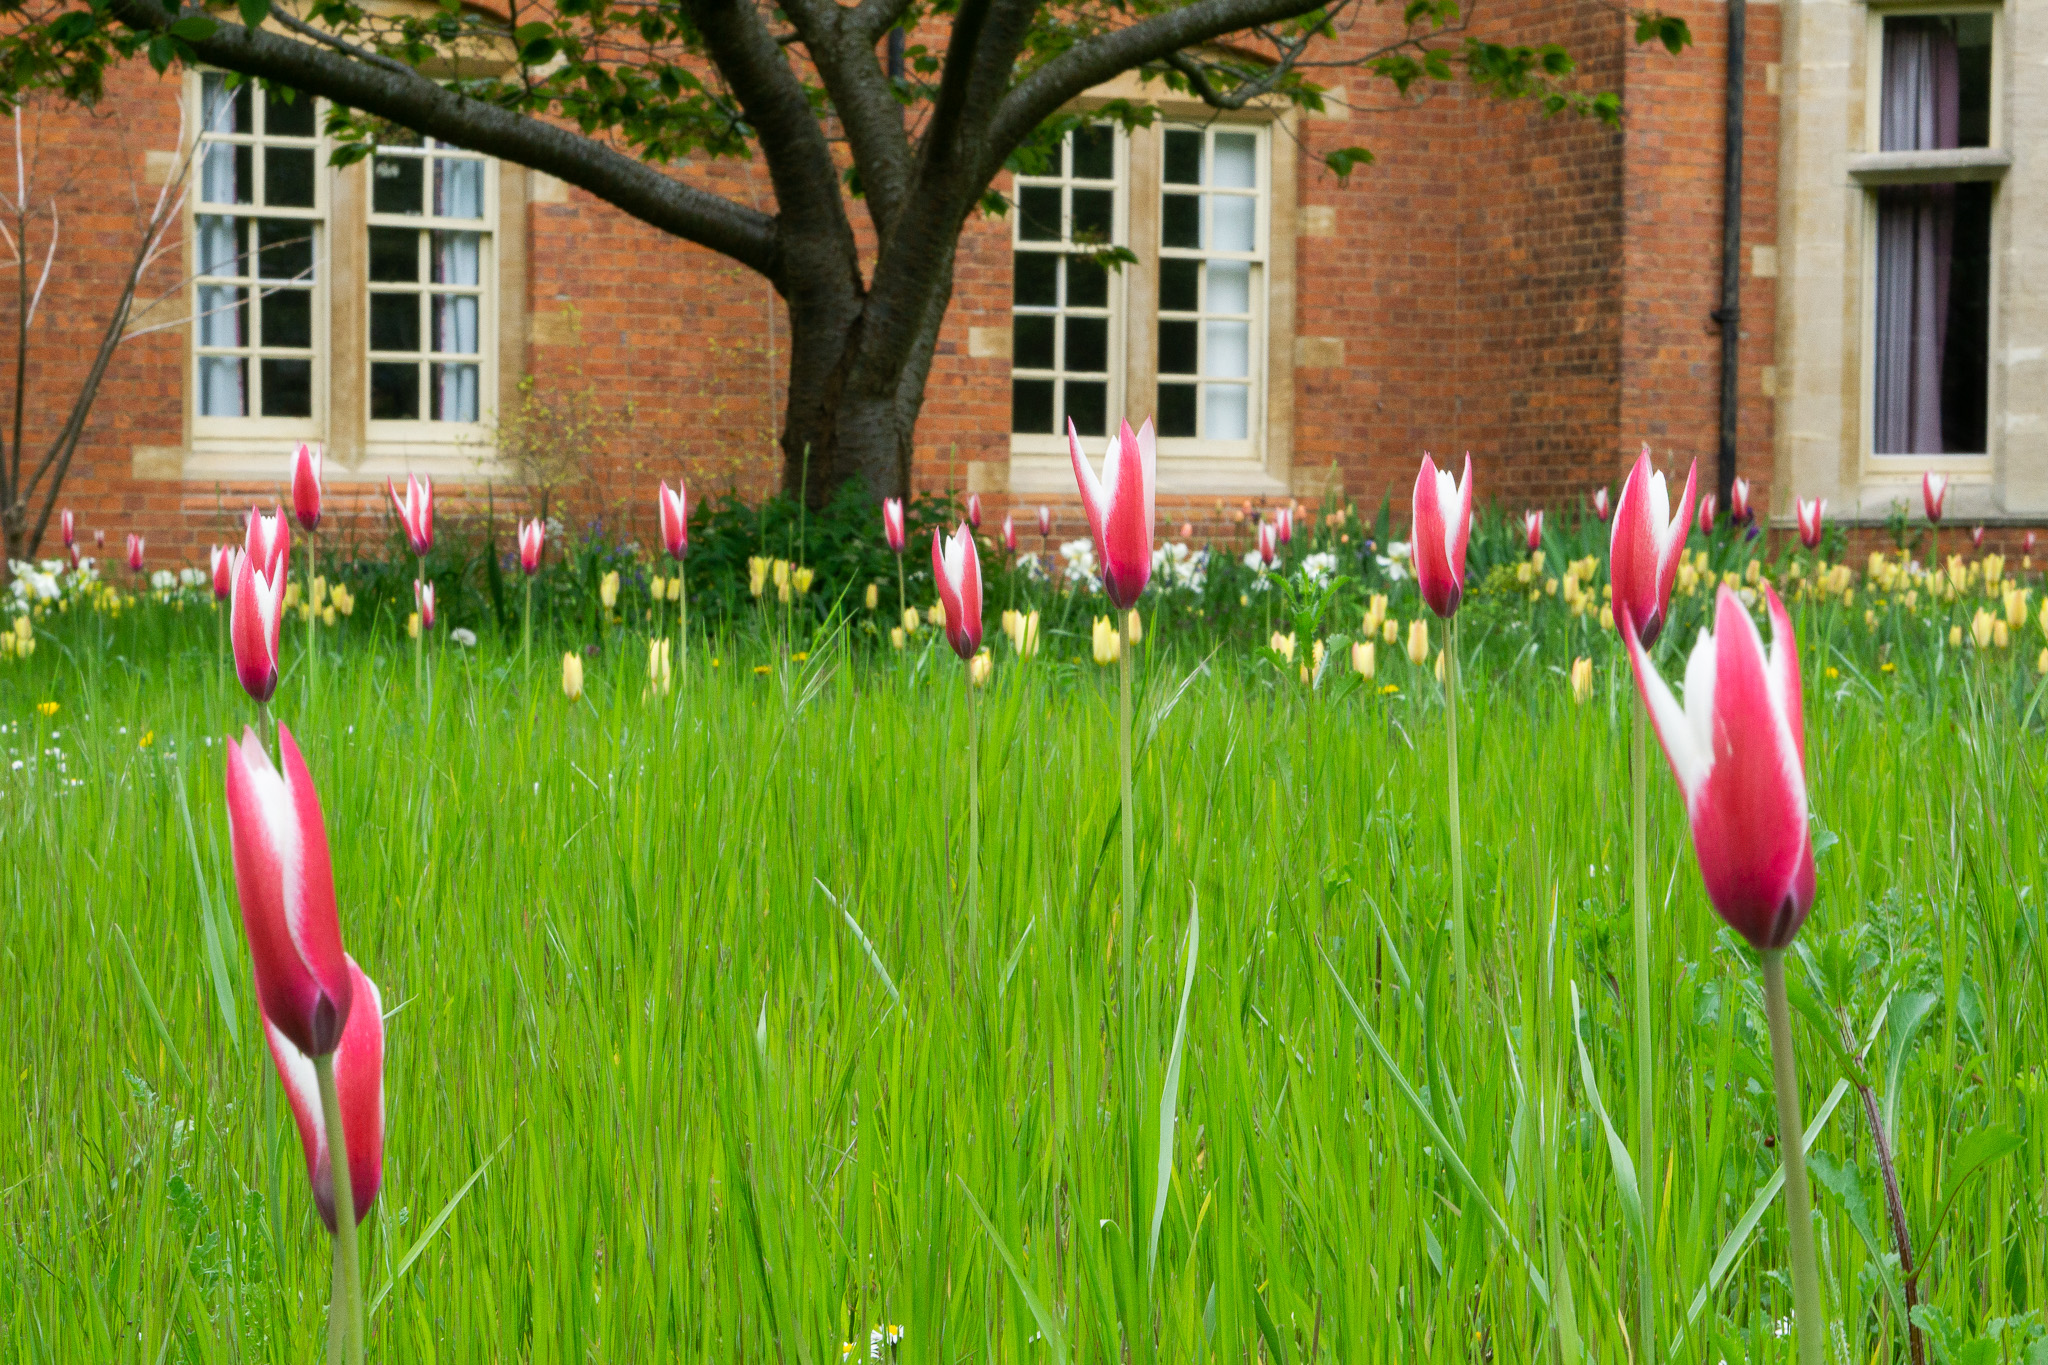 The Meadow area is enjoying a wild tulip display of its own, featuring pink and white peppermint tulips and yellow honky tonk tulips.